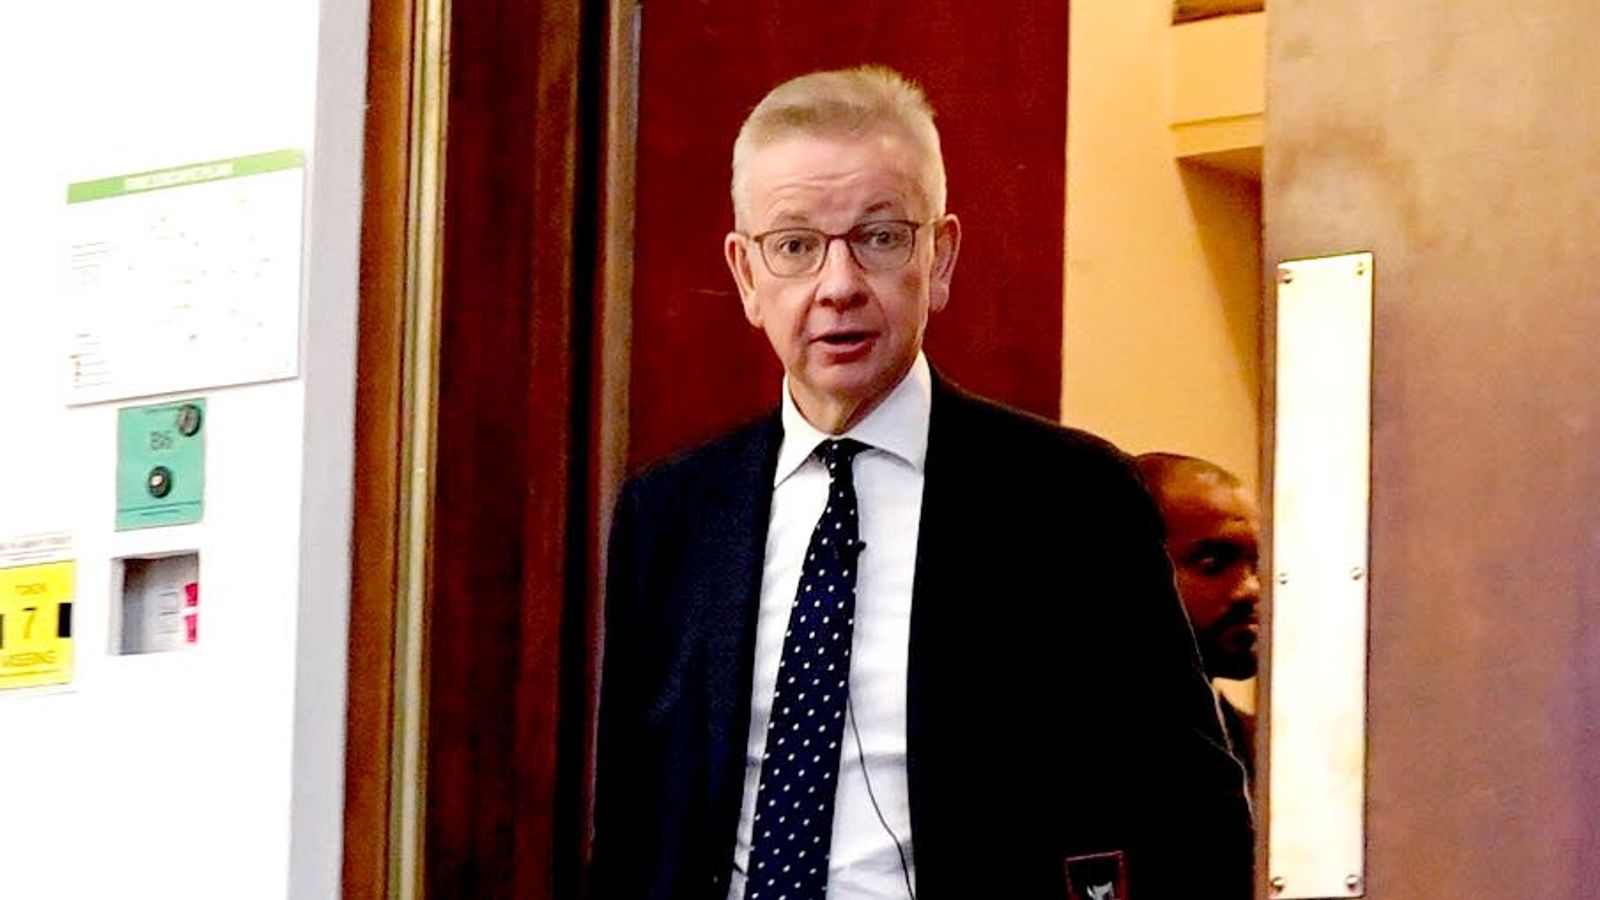 Michael Gove confirms he cooperated with criminal inquiry into Mone PPE scandal